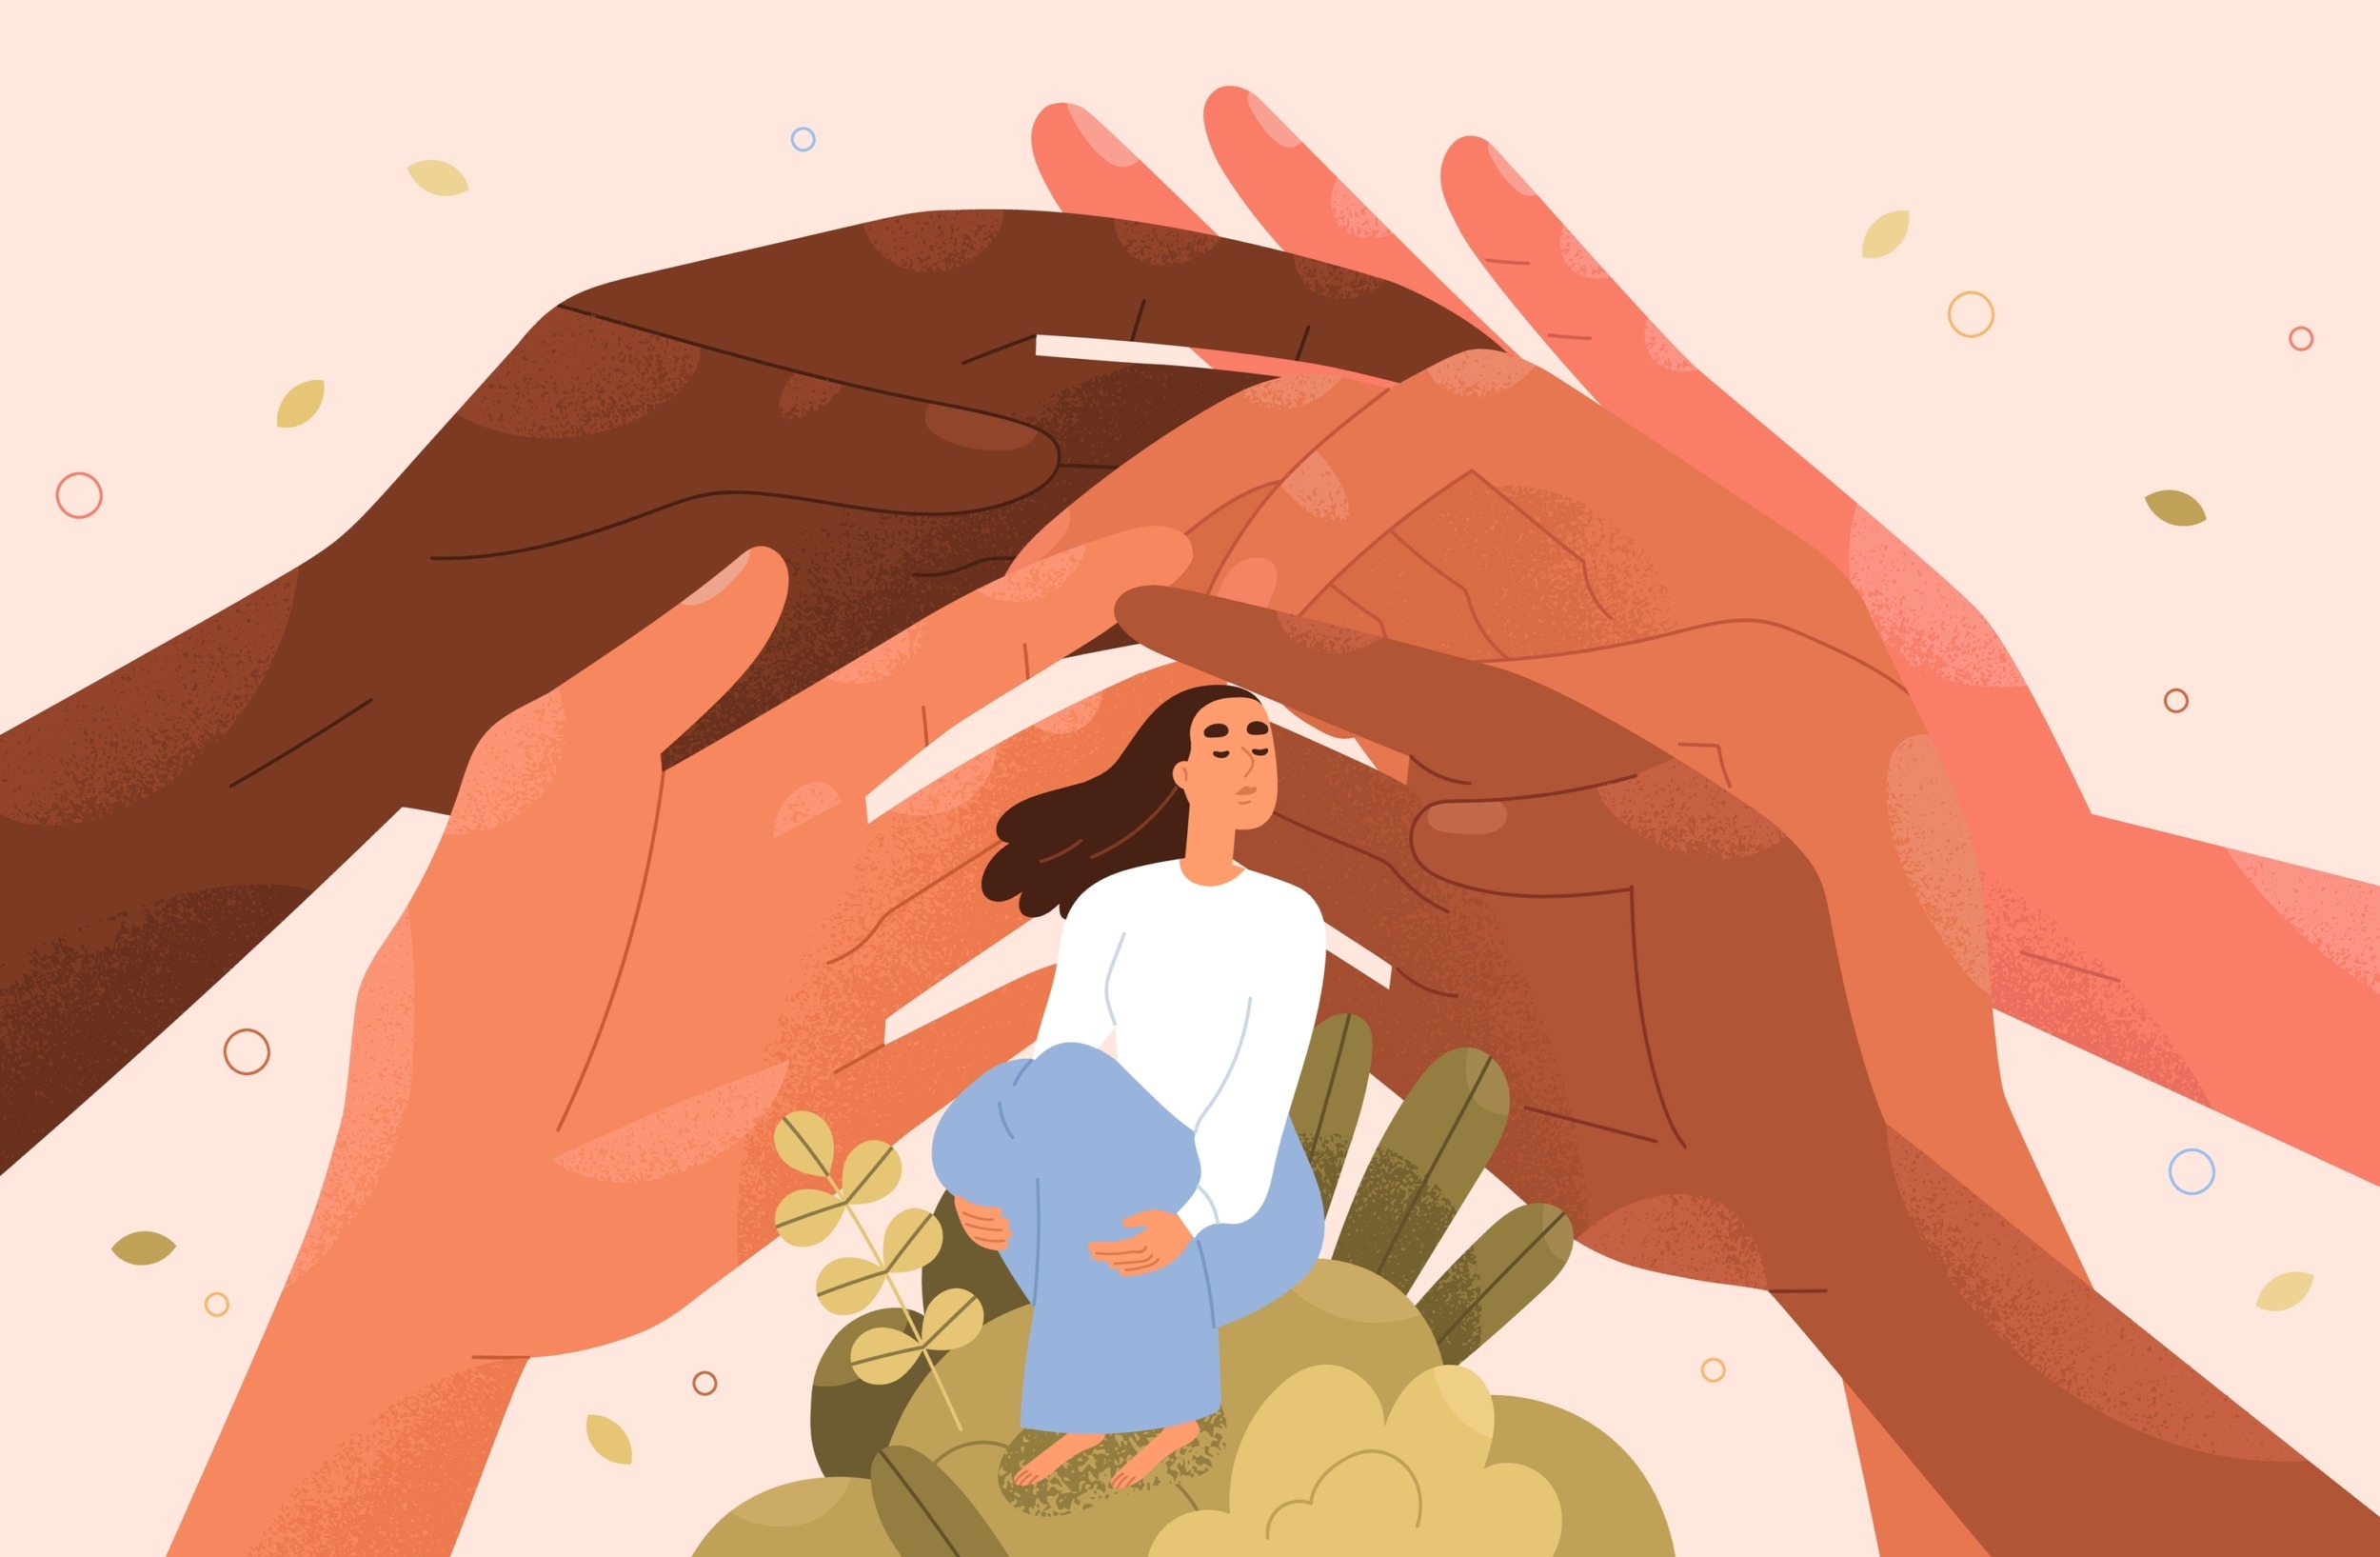 Youth Services: Illustration of large multi-colored skin-toned hands surrounding/sheltering a person sitting beneath the hands